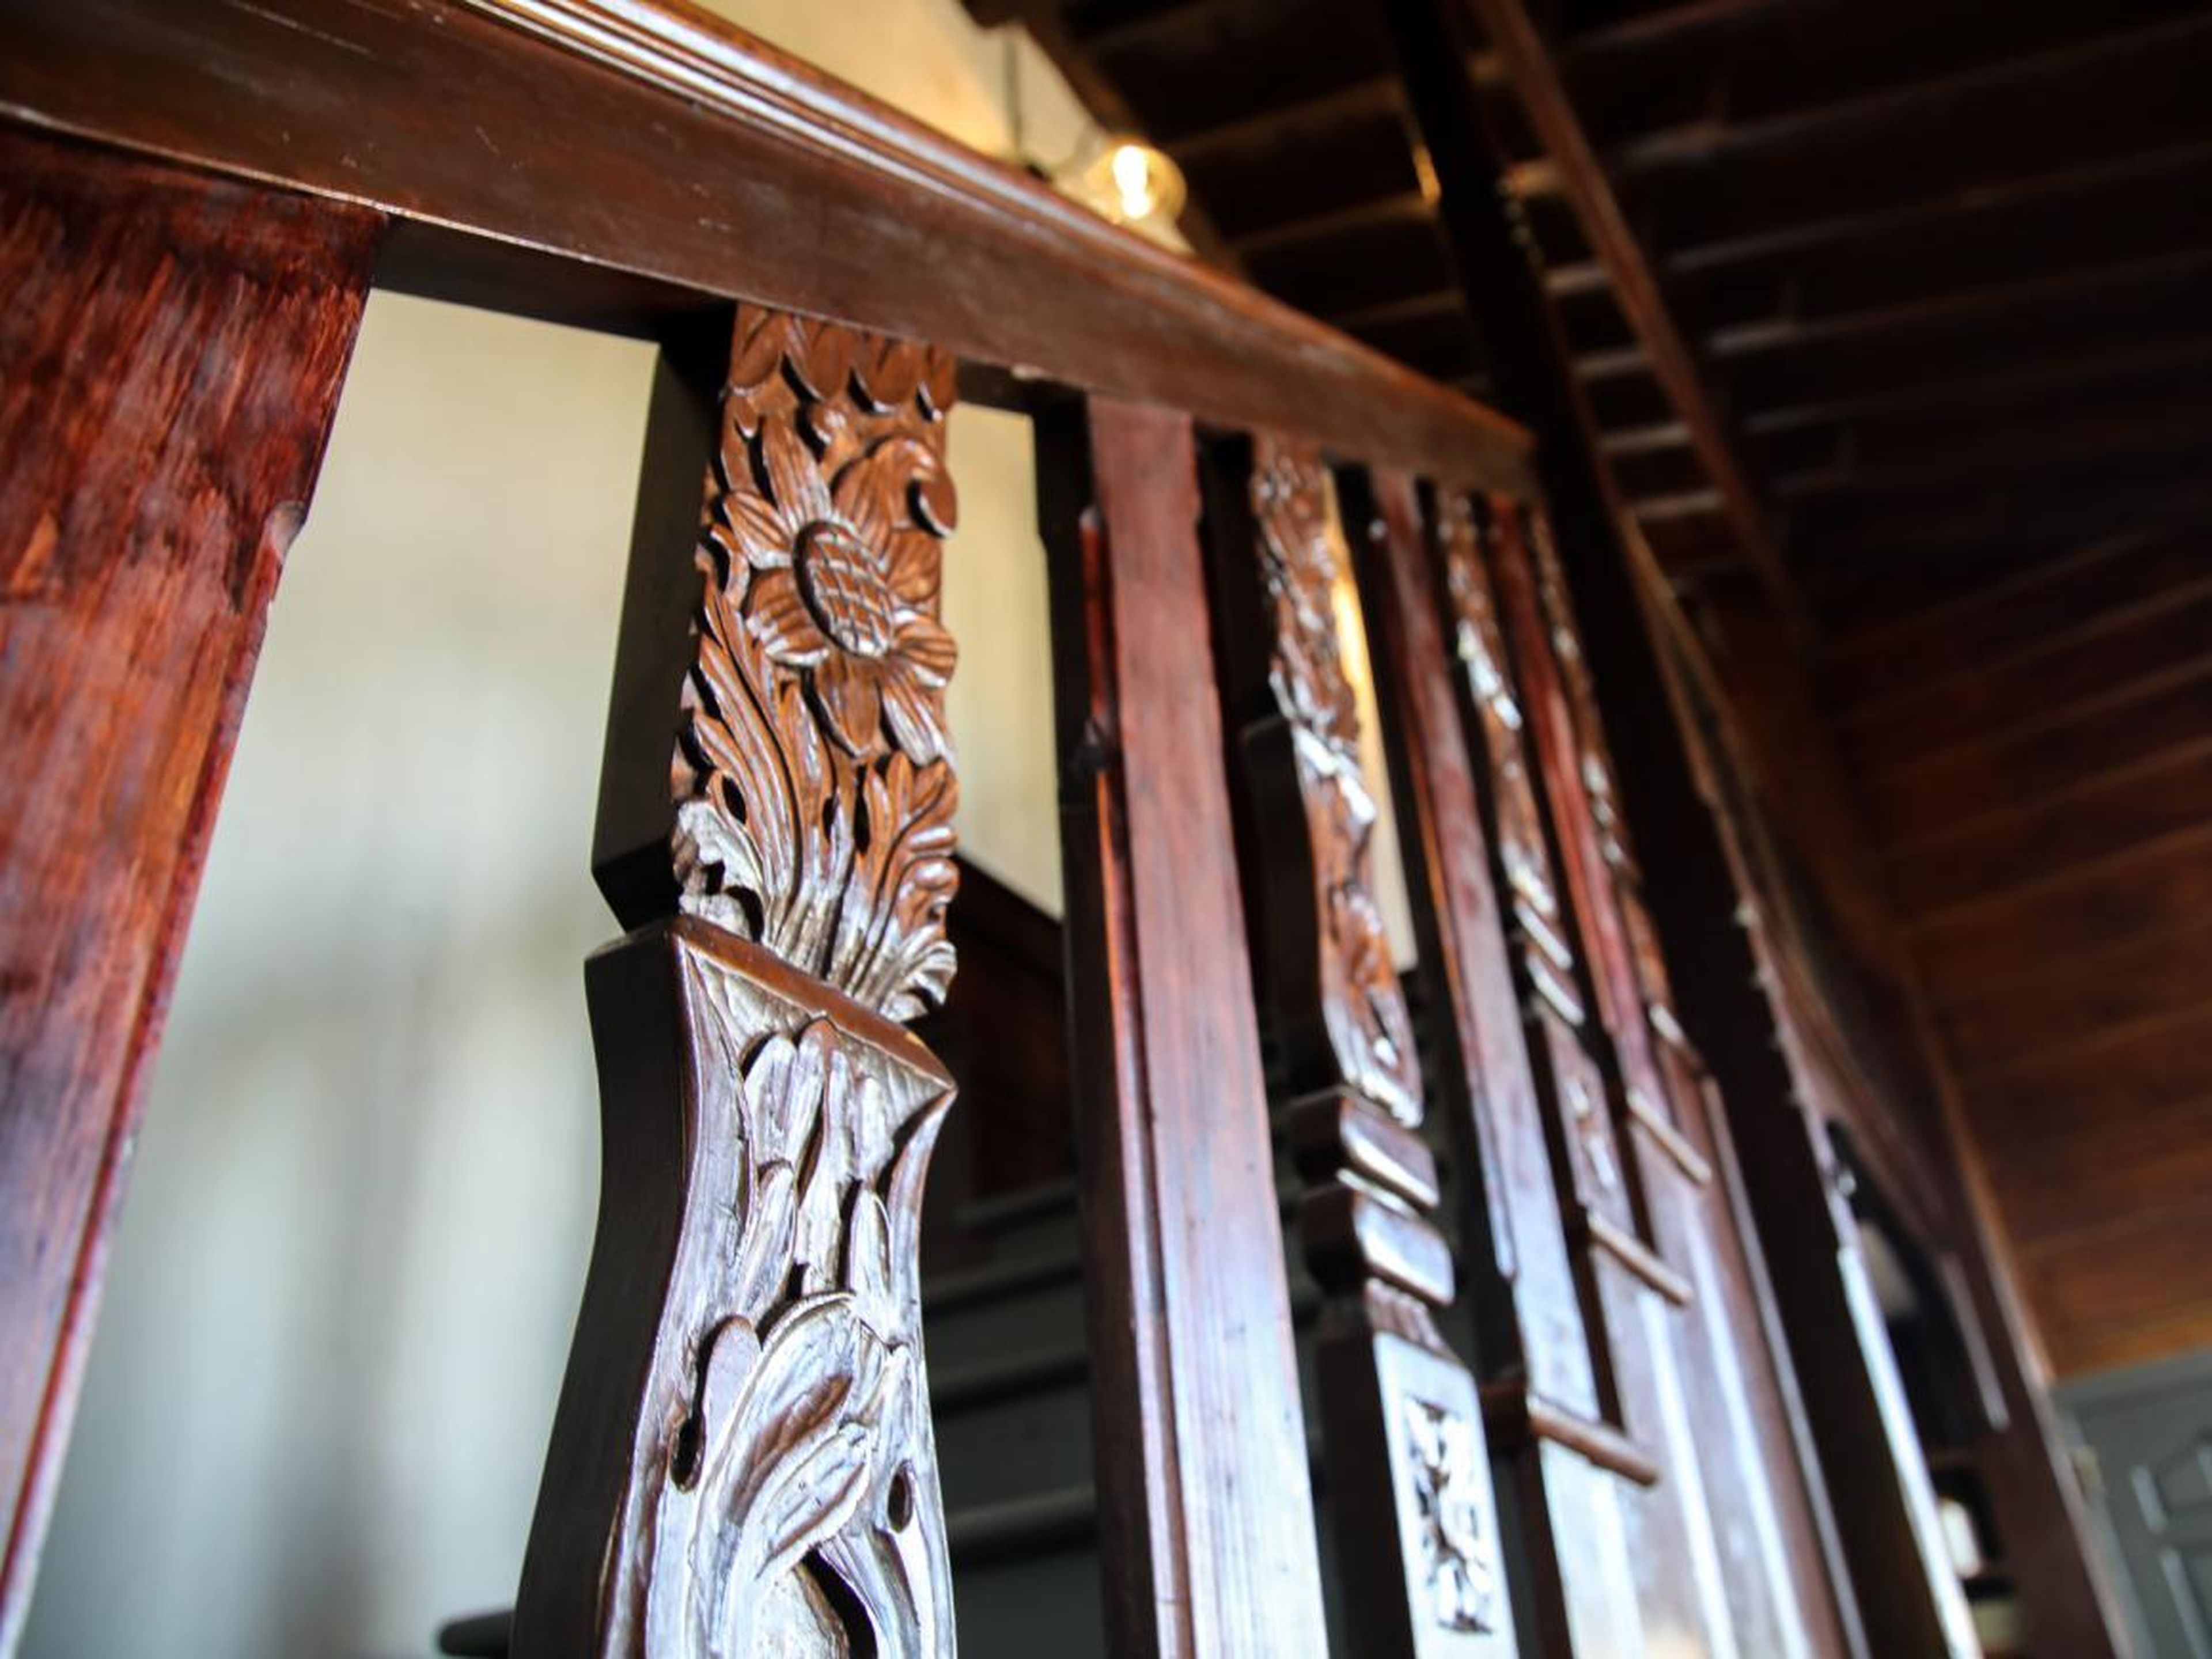 He integrated intricate woodwork into the home. The touches he made to the property are largely what remains today.